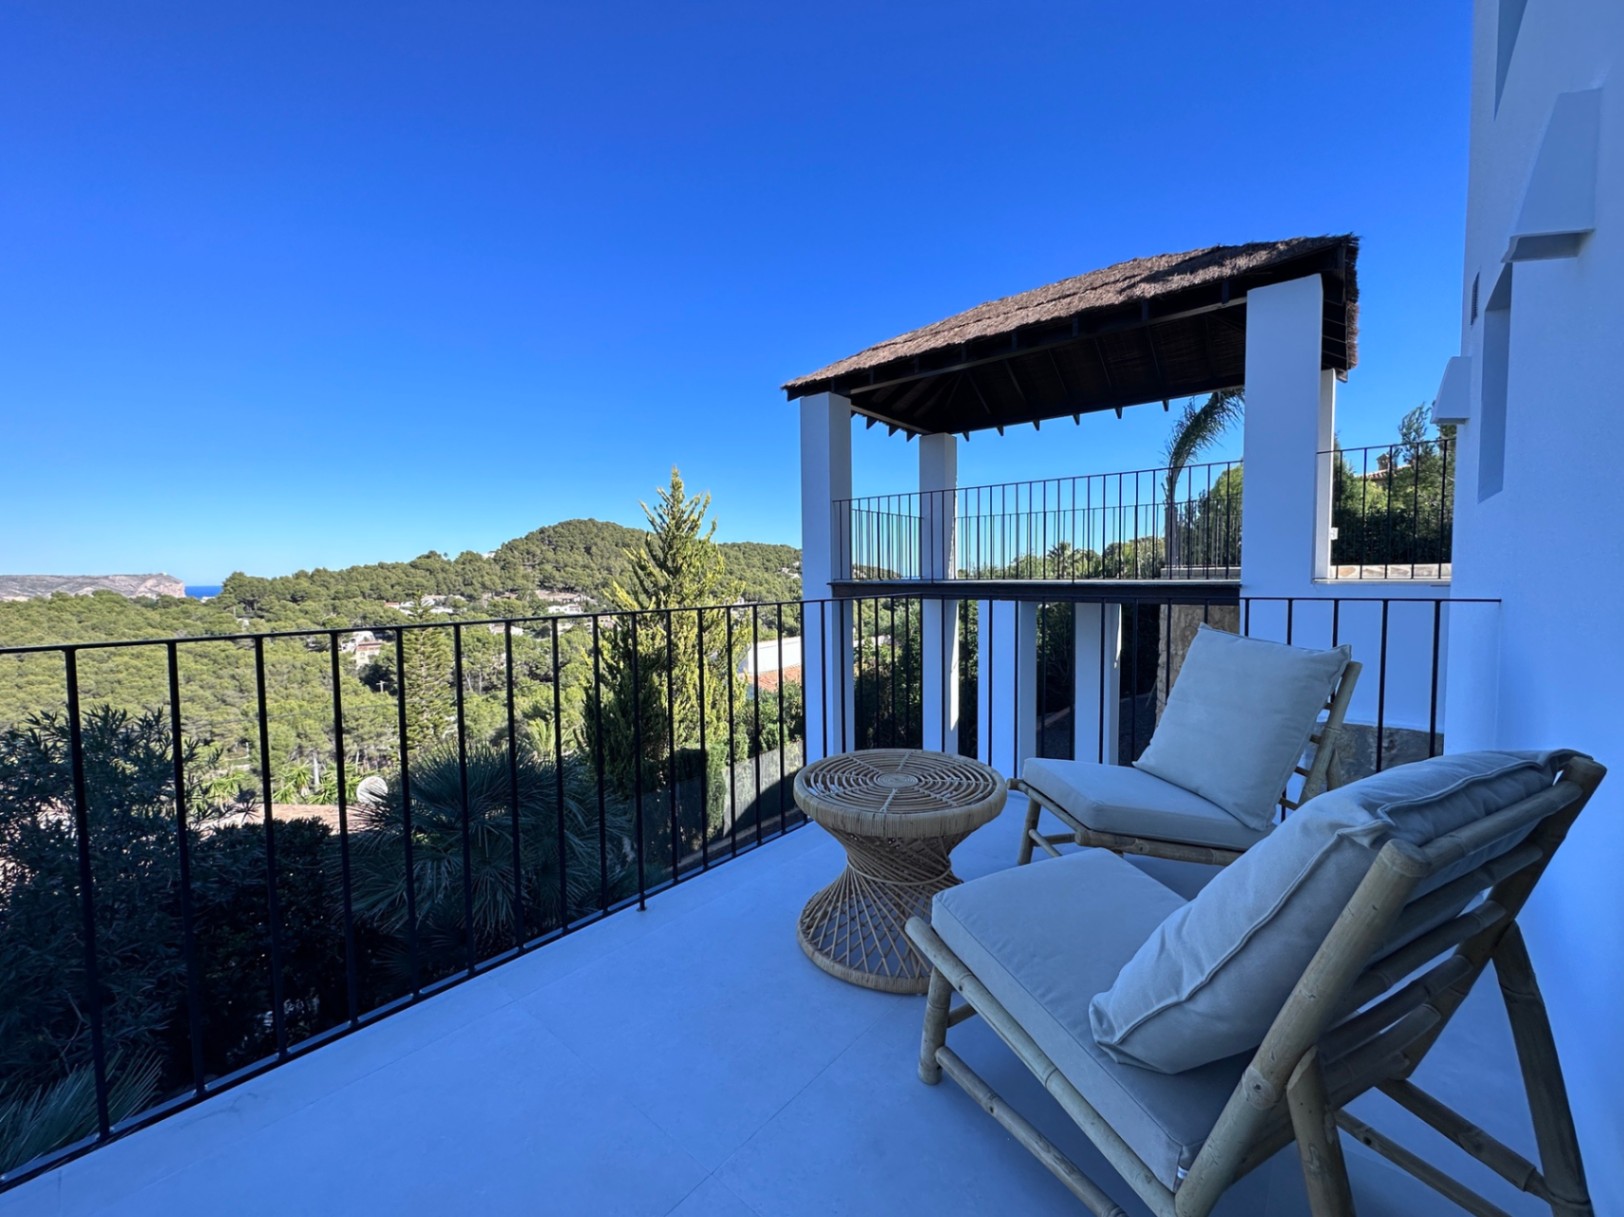 Fully renovated 4 bedroom villa with spectacular views for sale in Javea